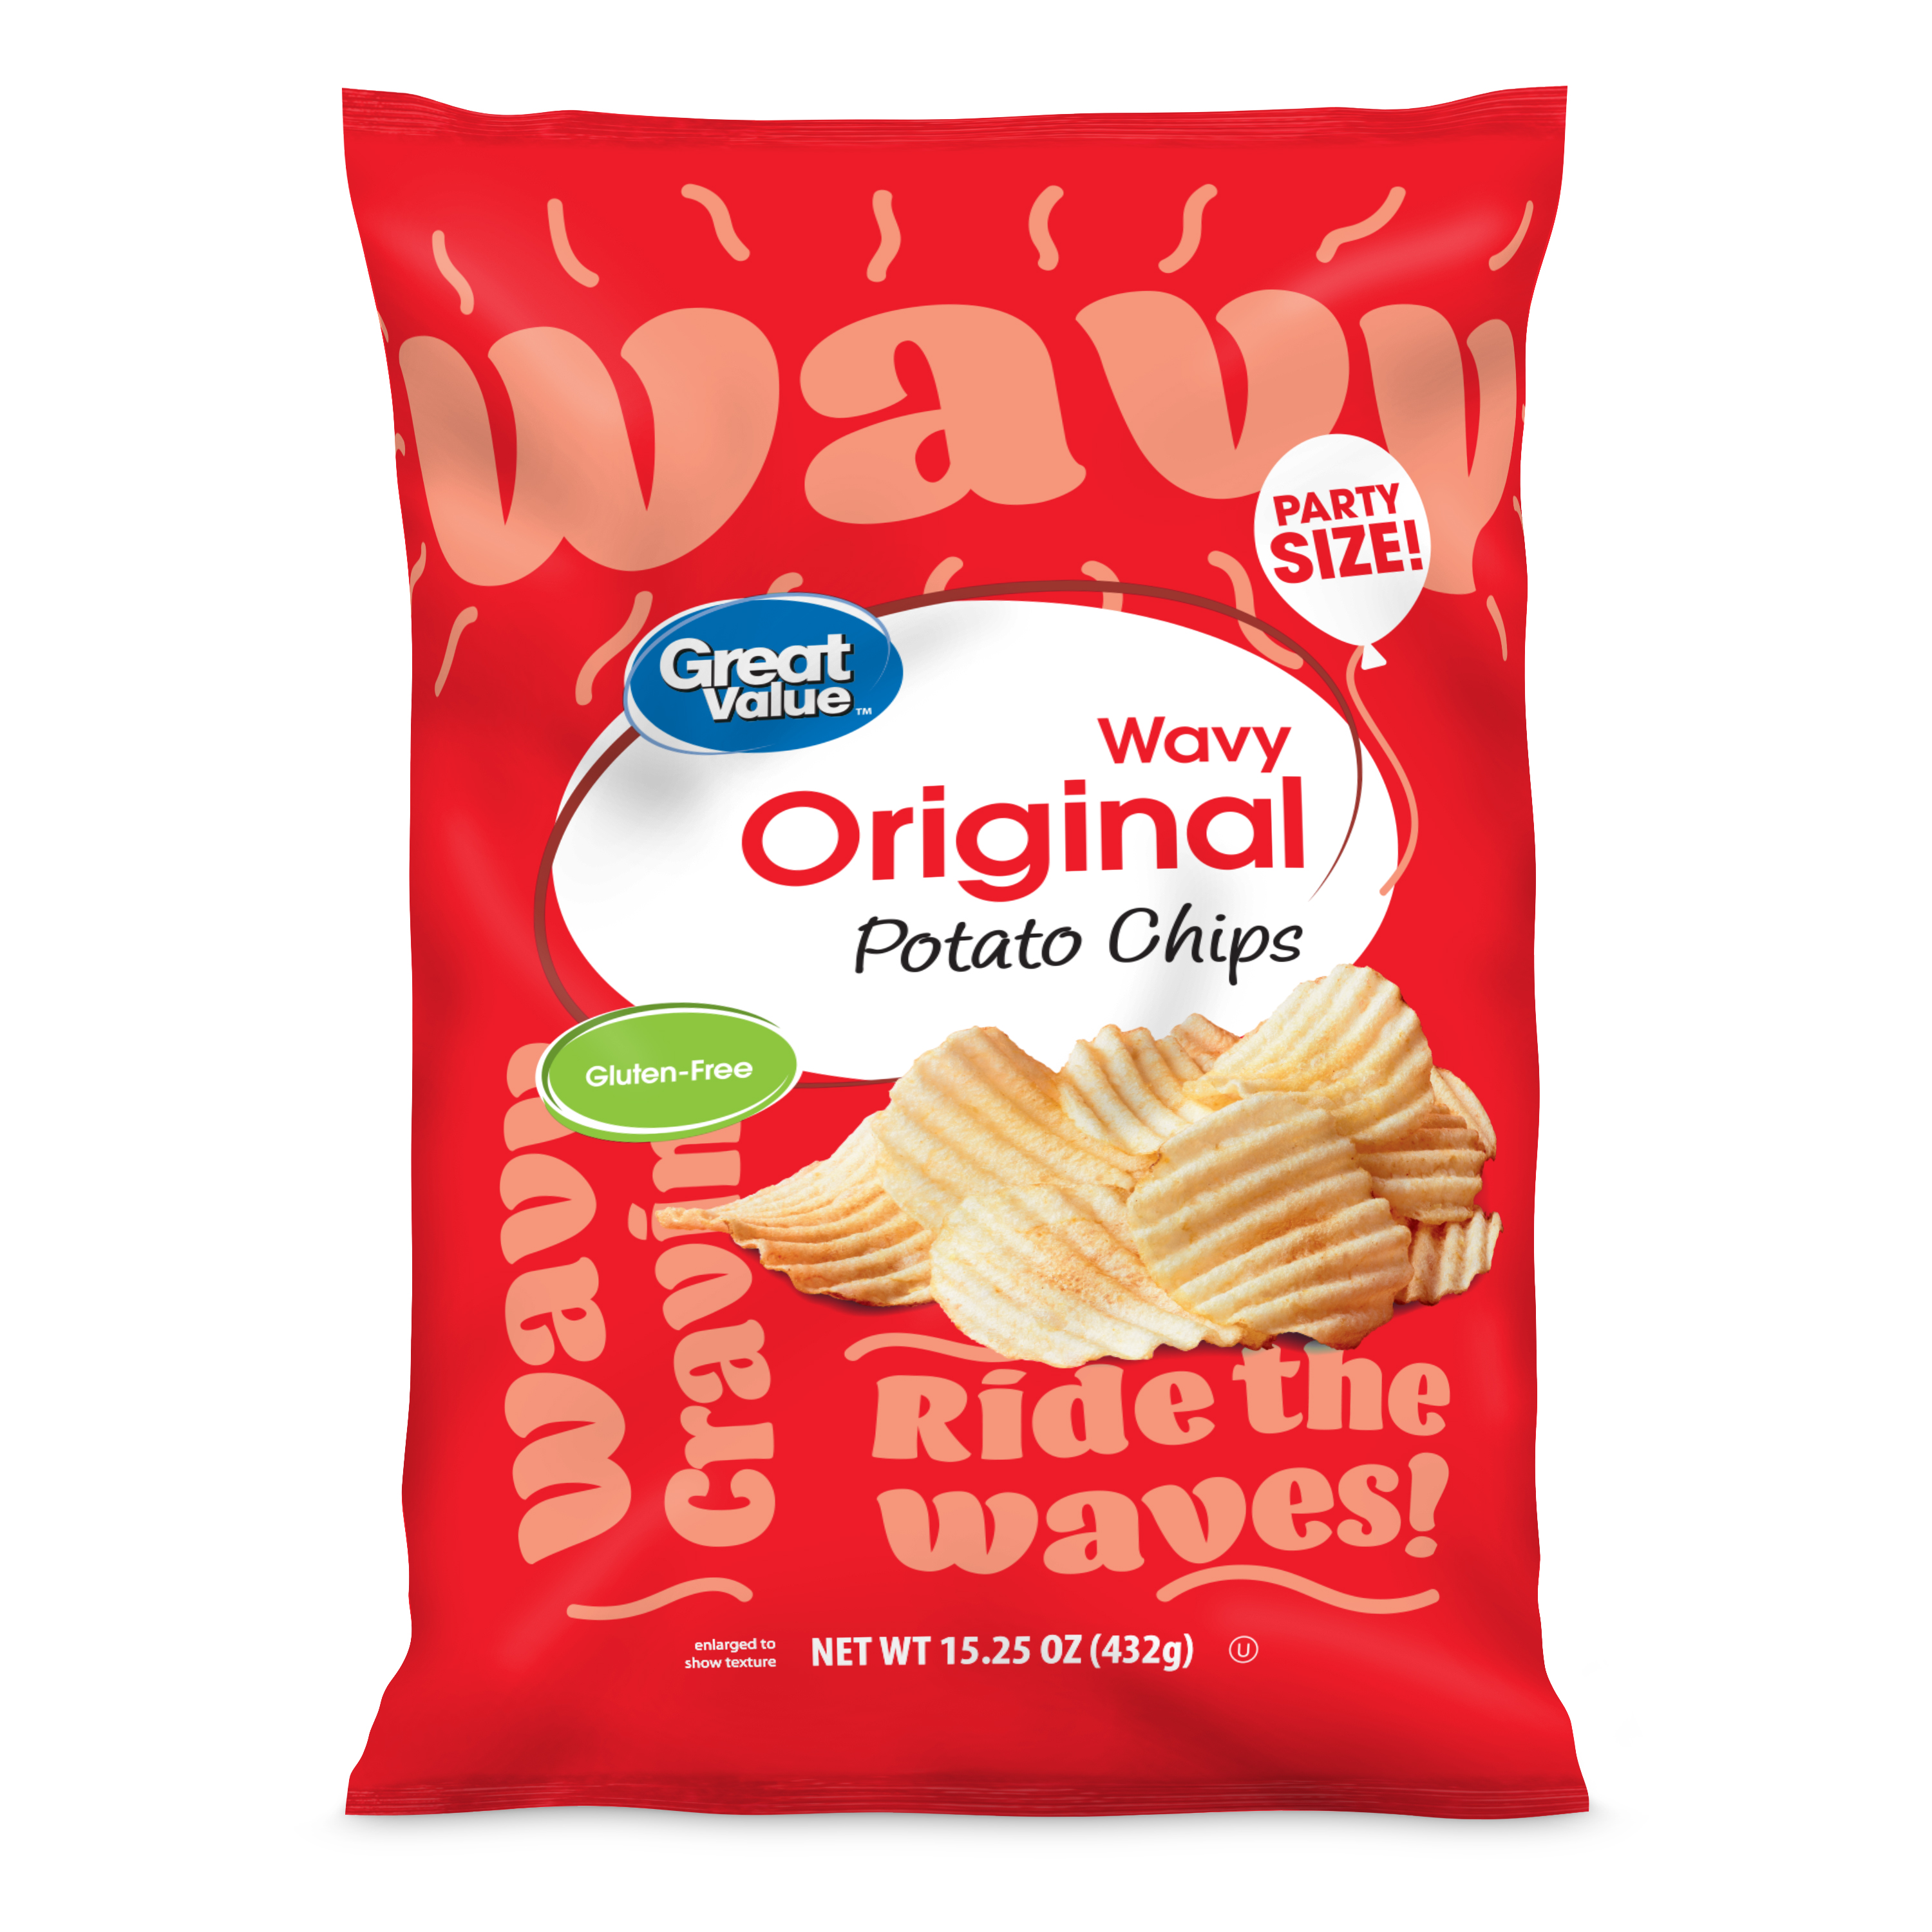 Great Value Original Wavy Potato Chips Party Size, 15.25 oz - image 1 of 8